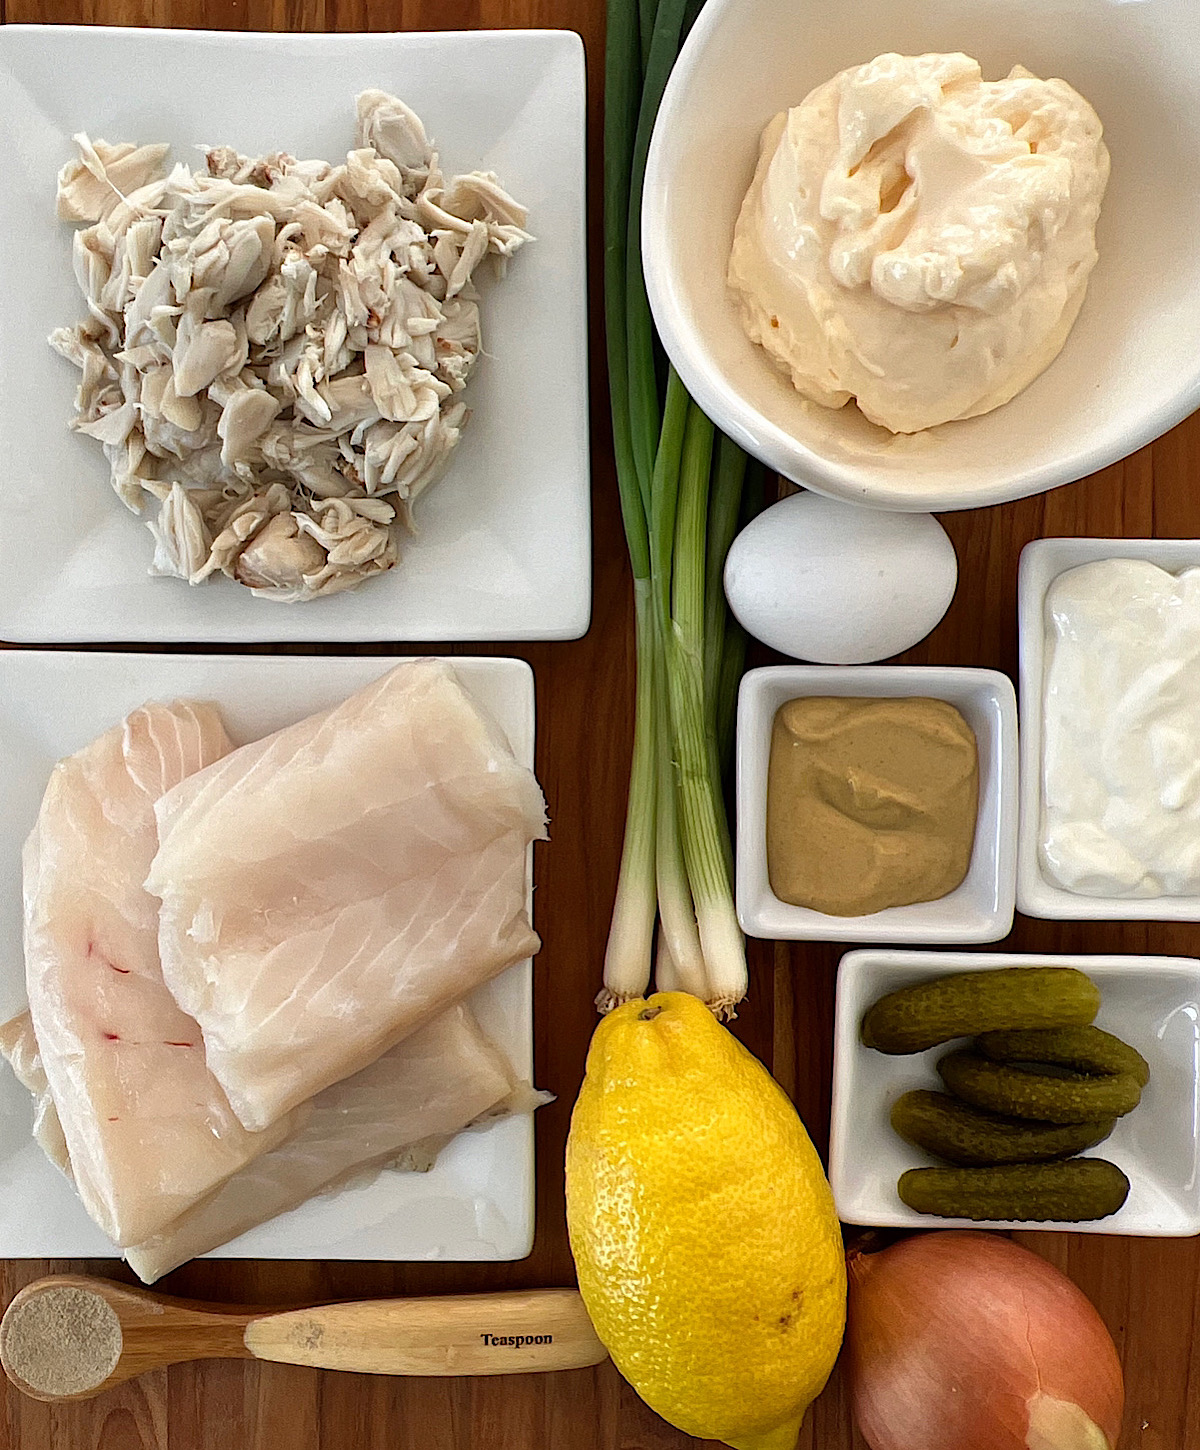 Ingredients for baked low carb fish cakes